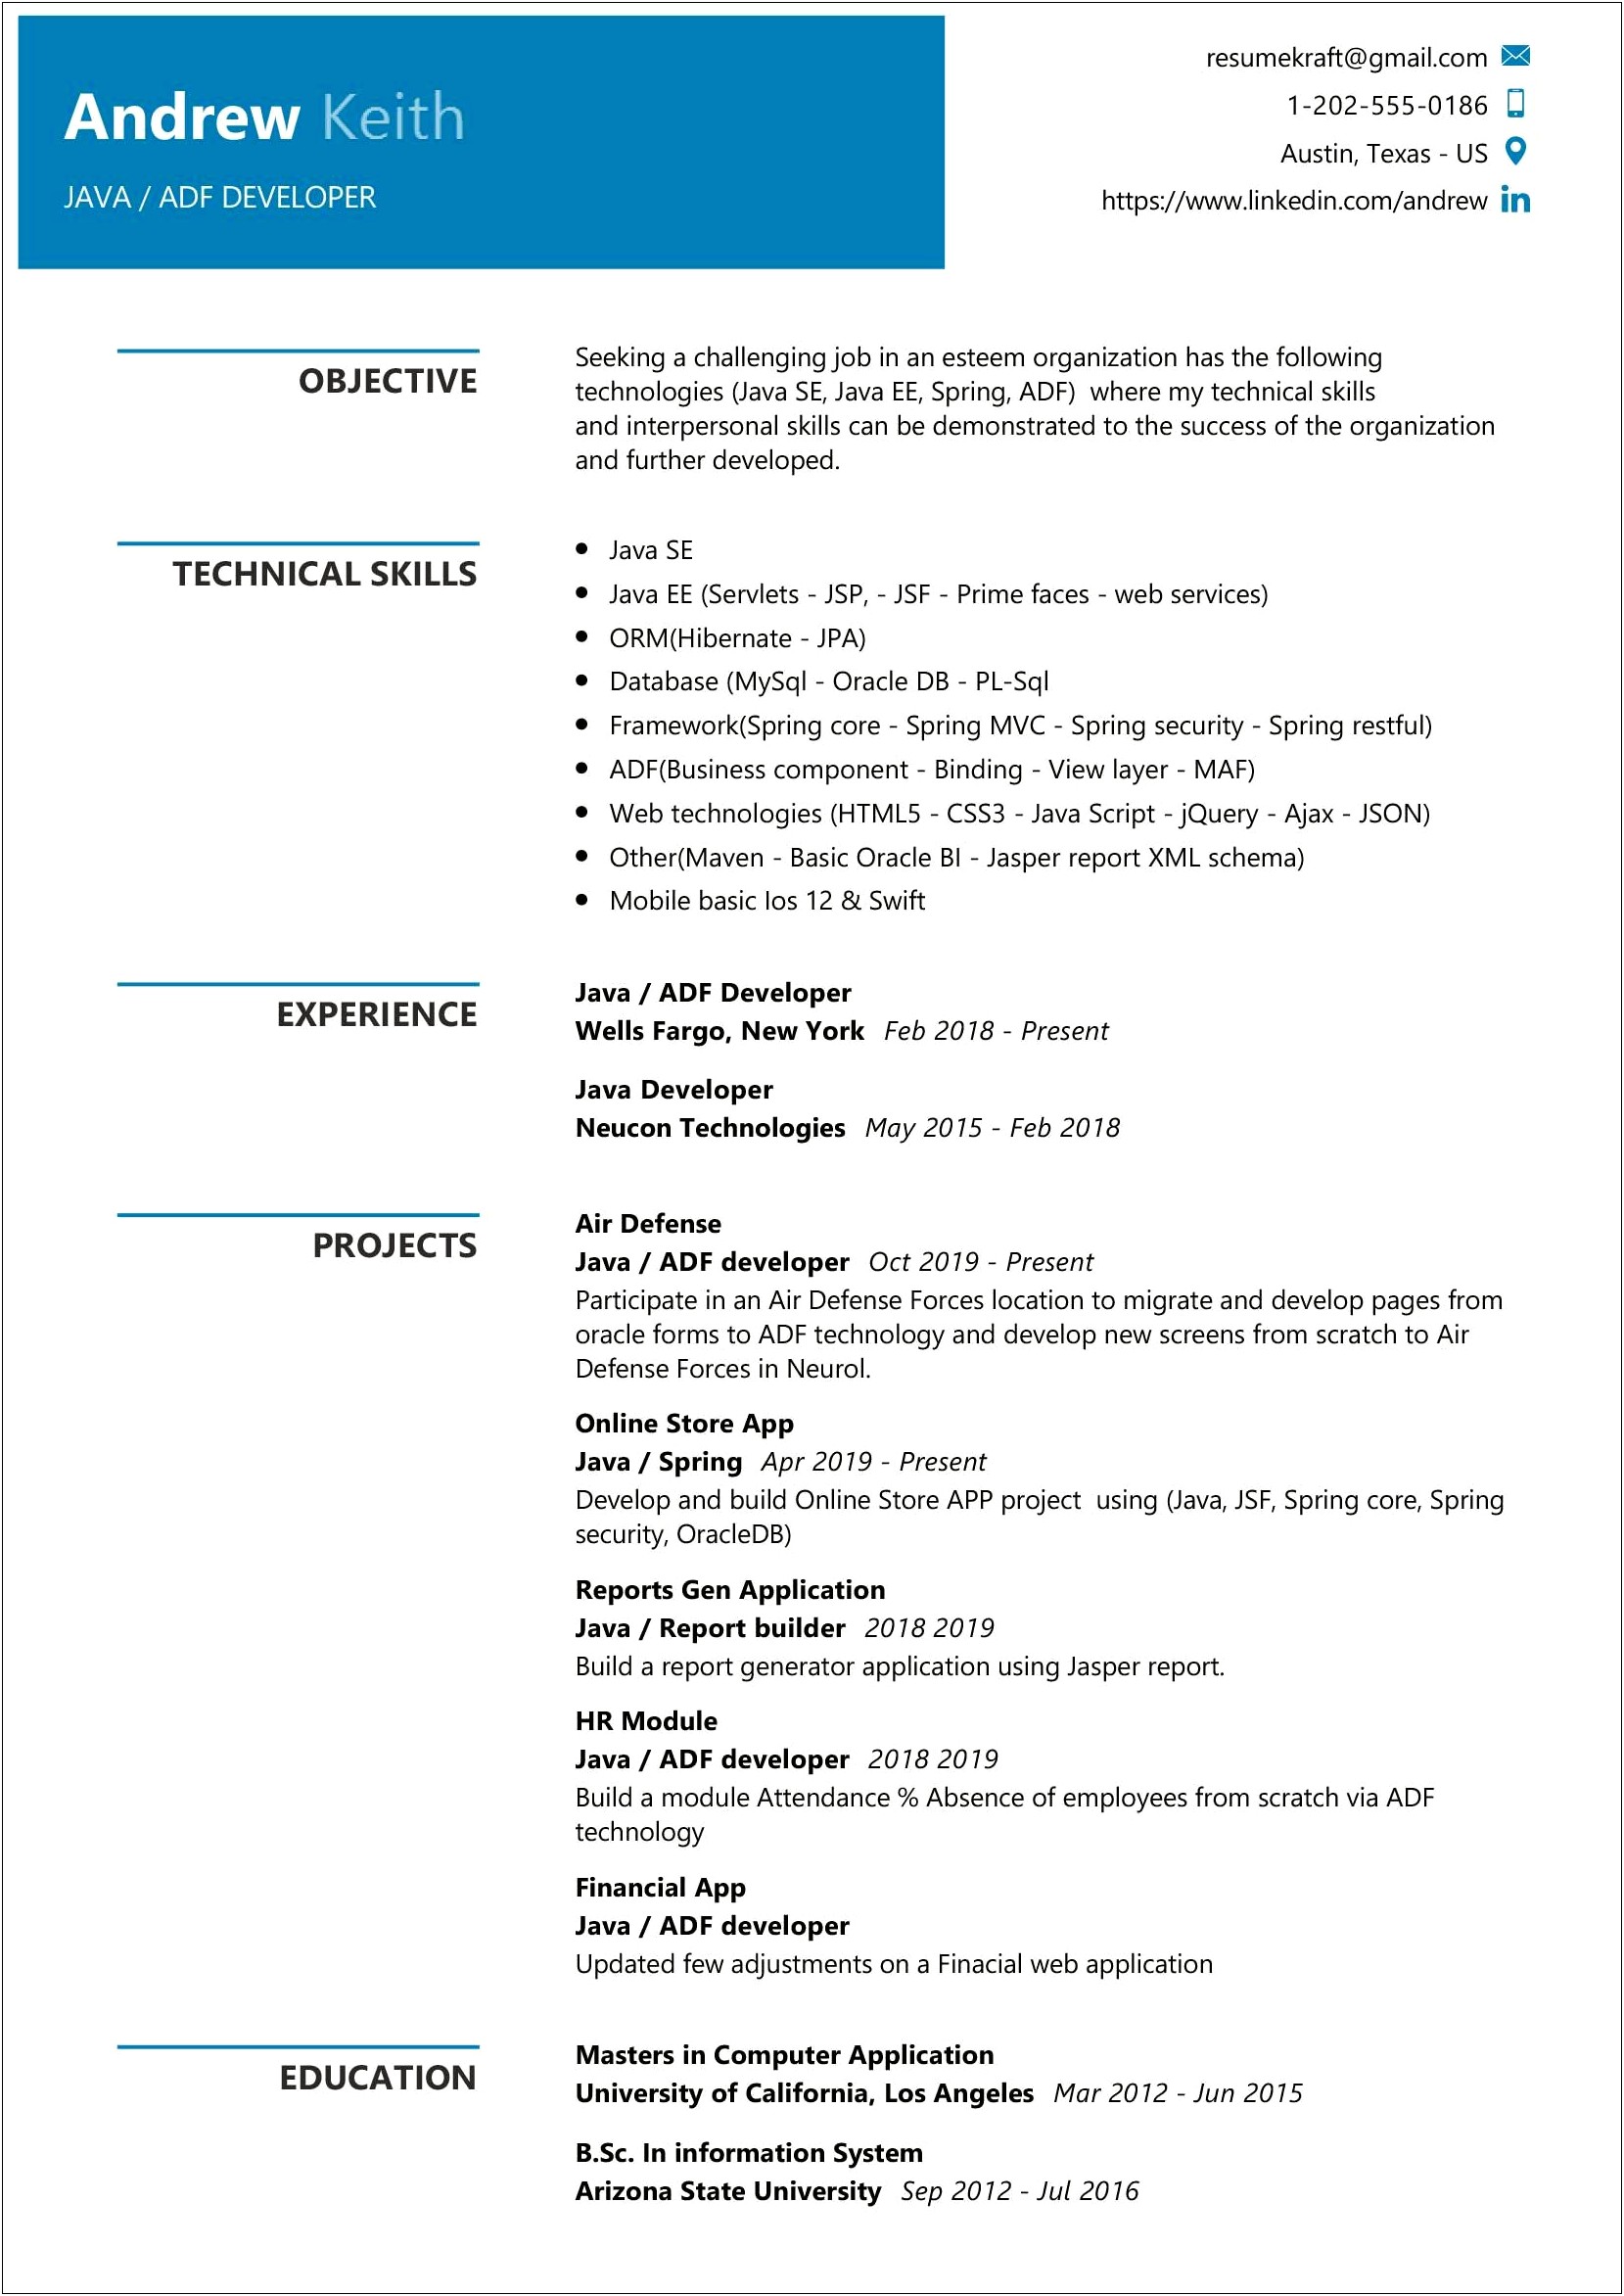 Best Resume For 2 Years Experience In Java